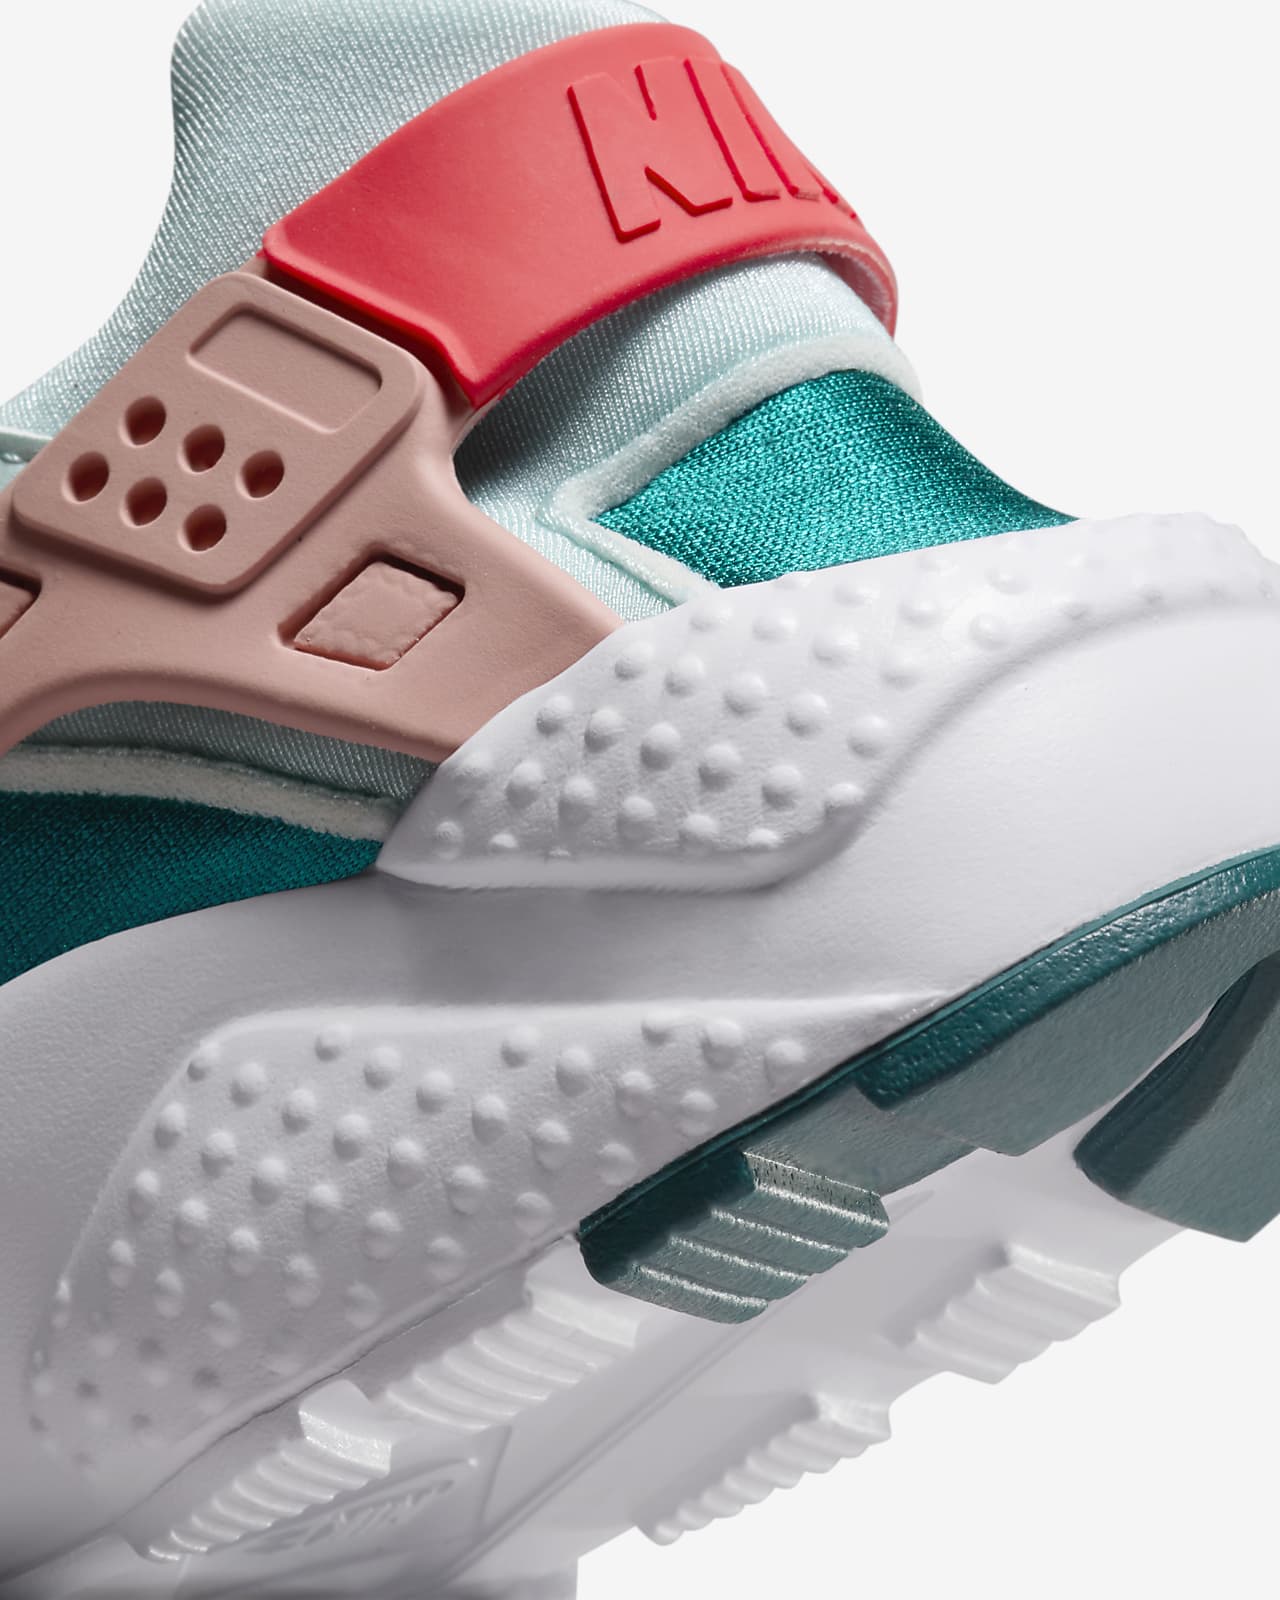 Nike Air Huarache Run Ultra : details and review - Sneakers